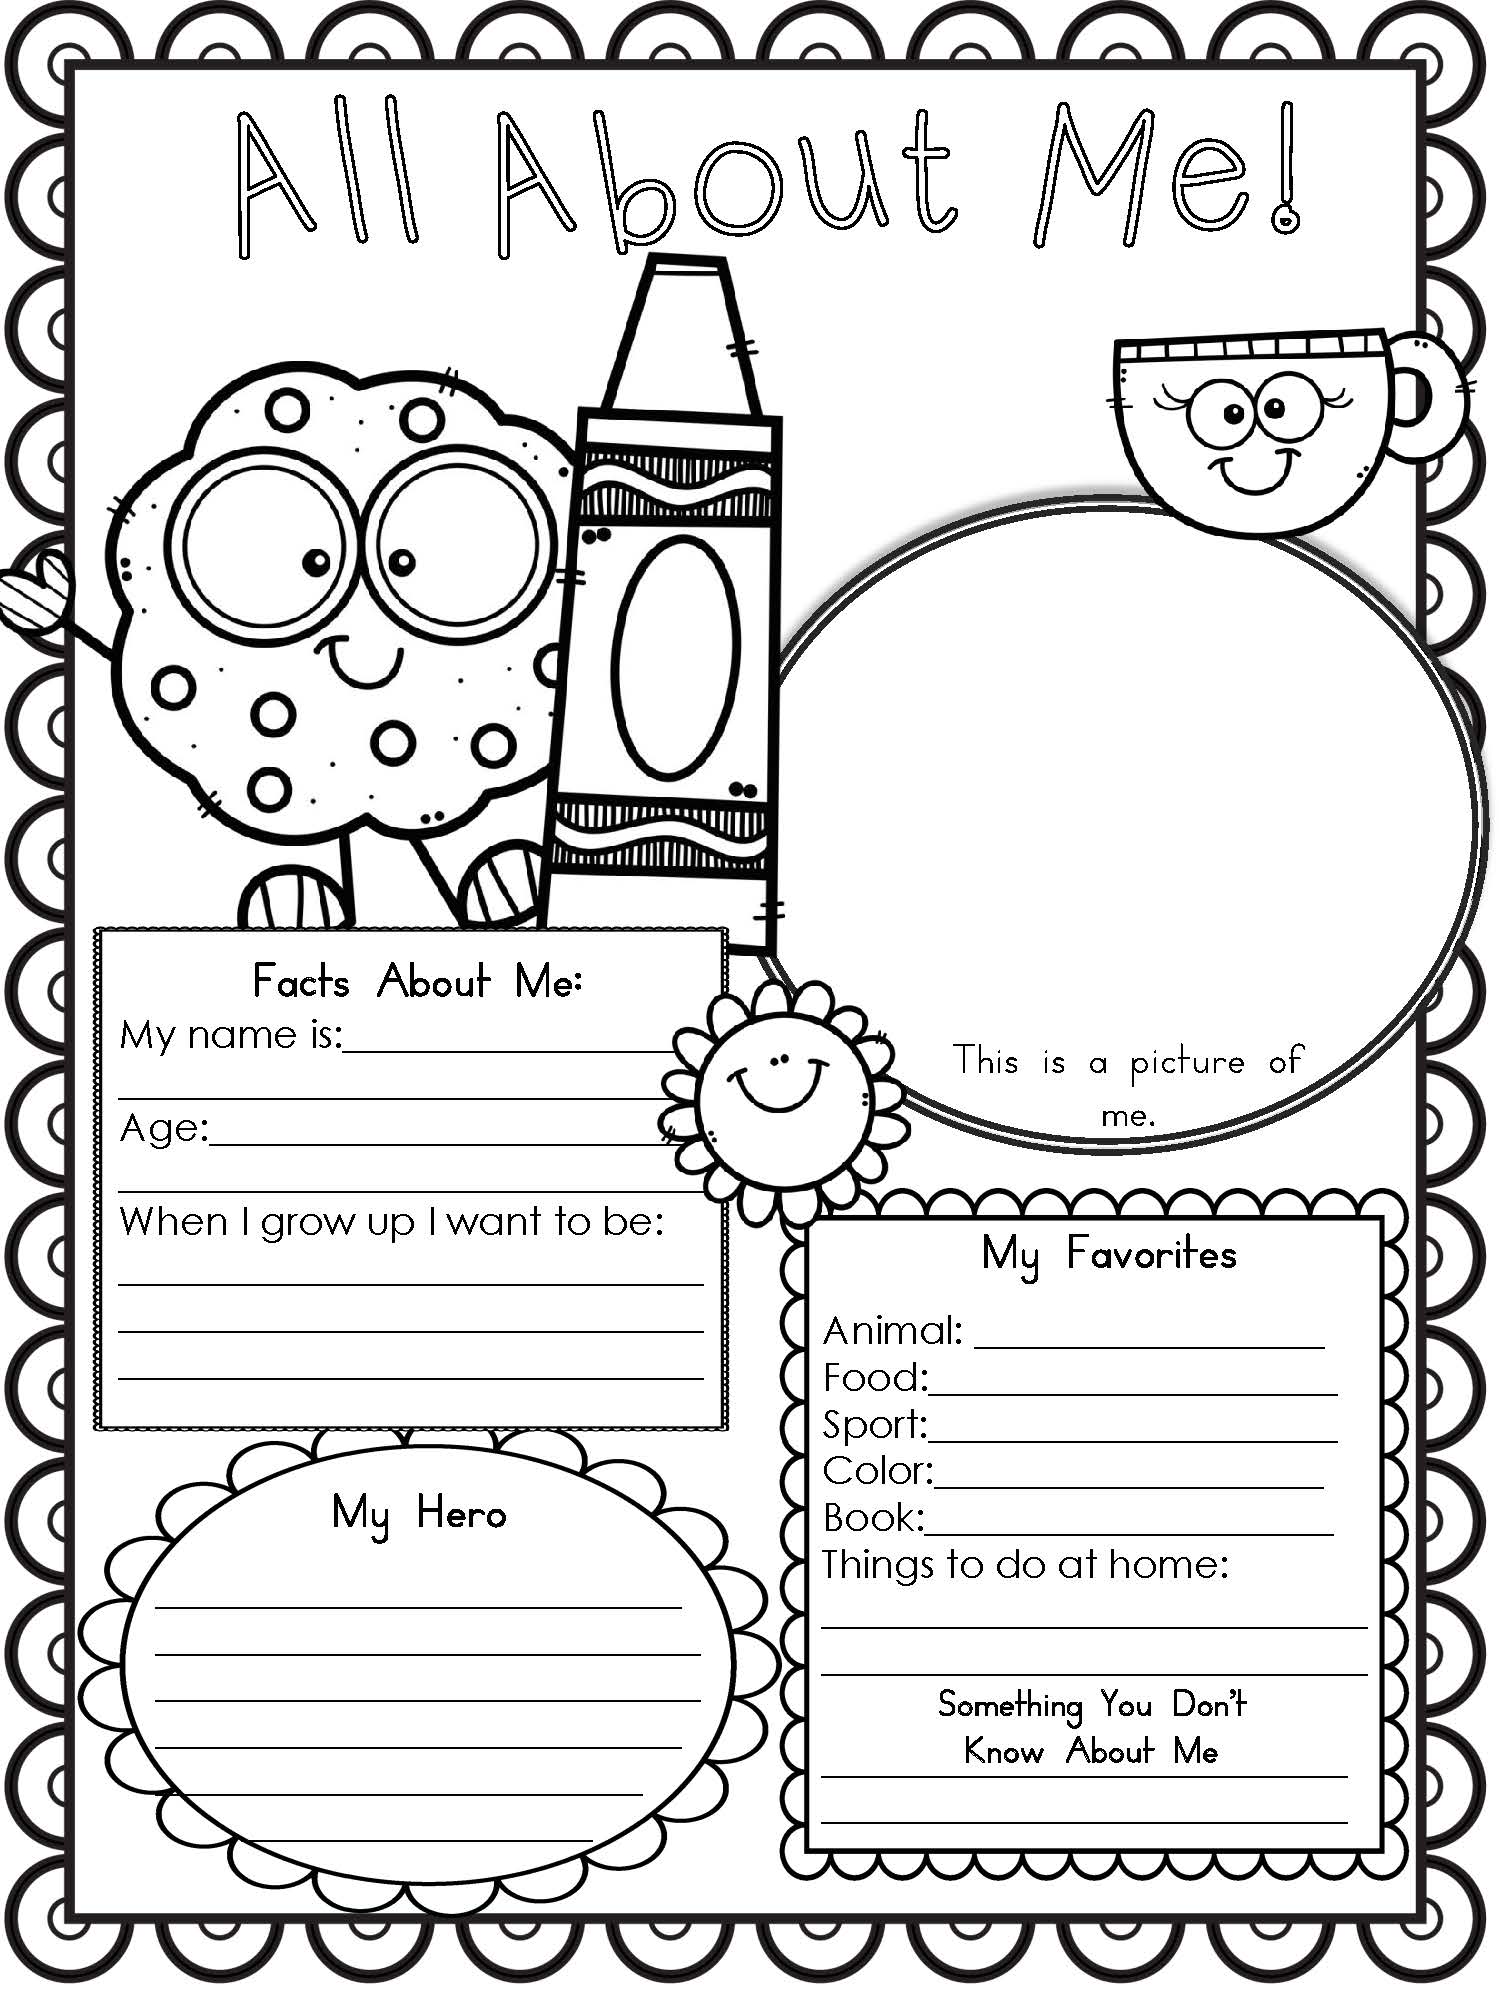 Free Printable All About Me Worksheet - Modern Homeschool Family Within All About Me Printable Worksheet